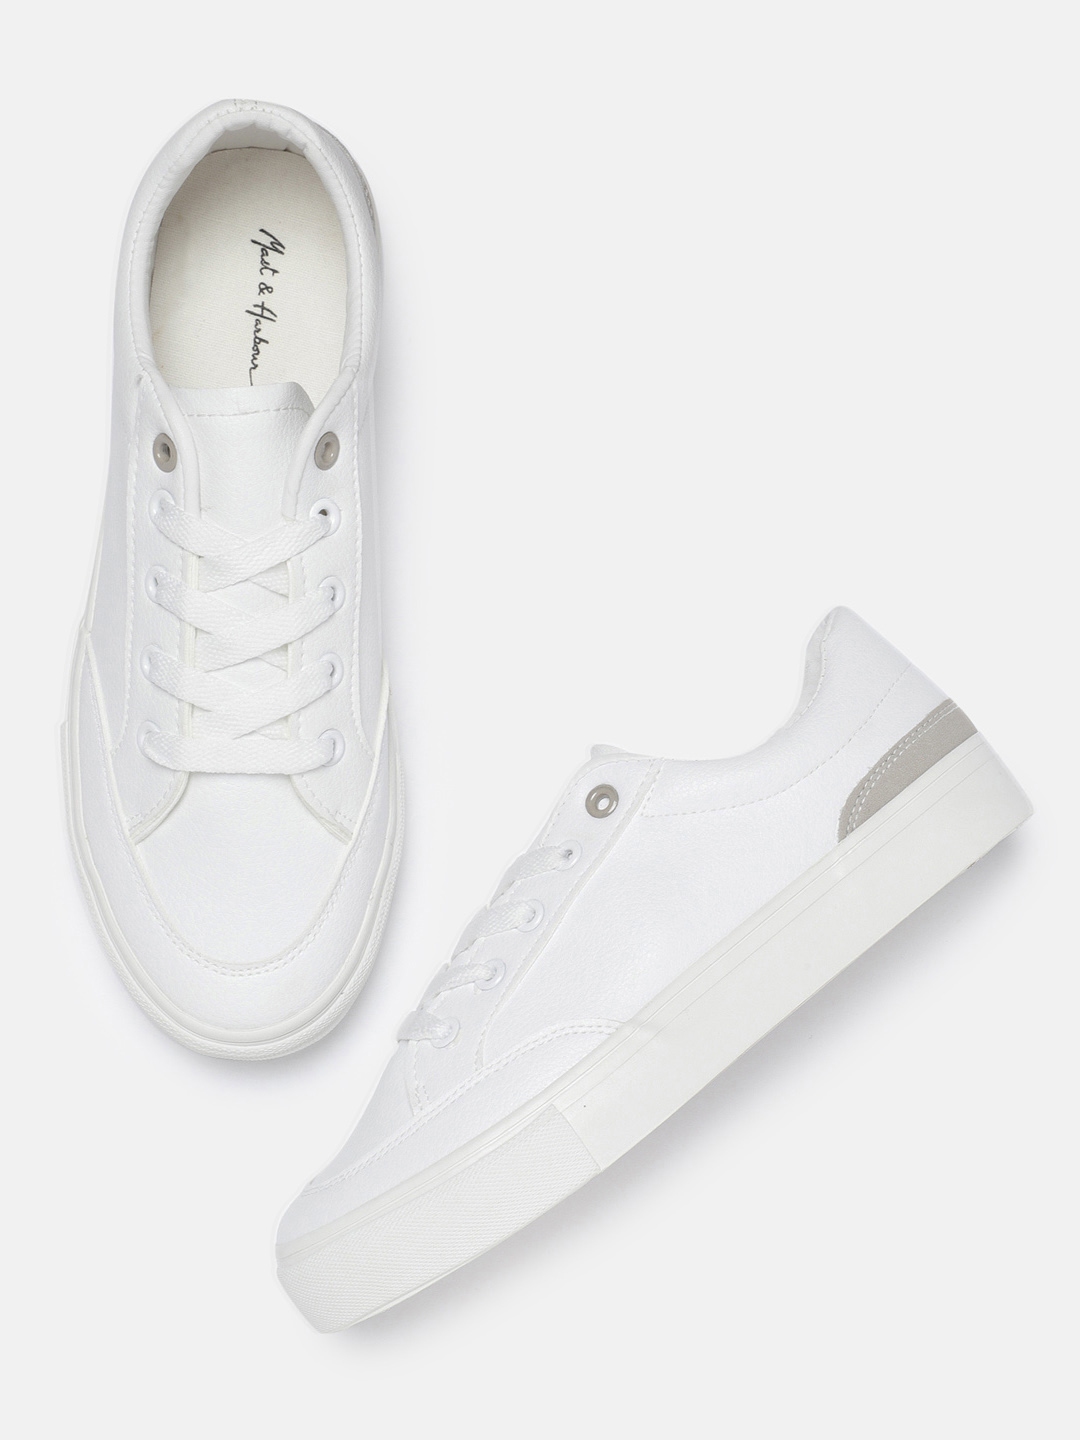 mast & harbour white sneakers